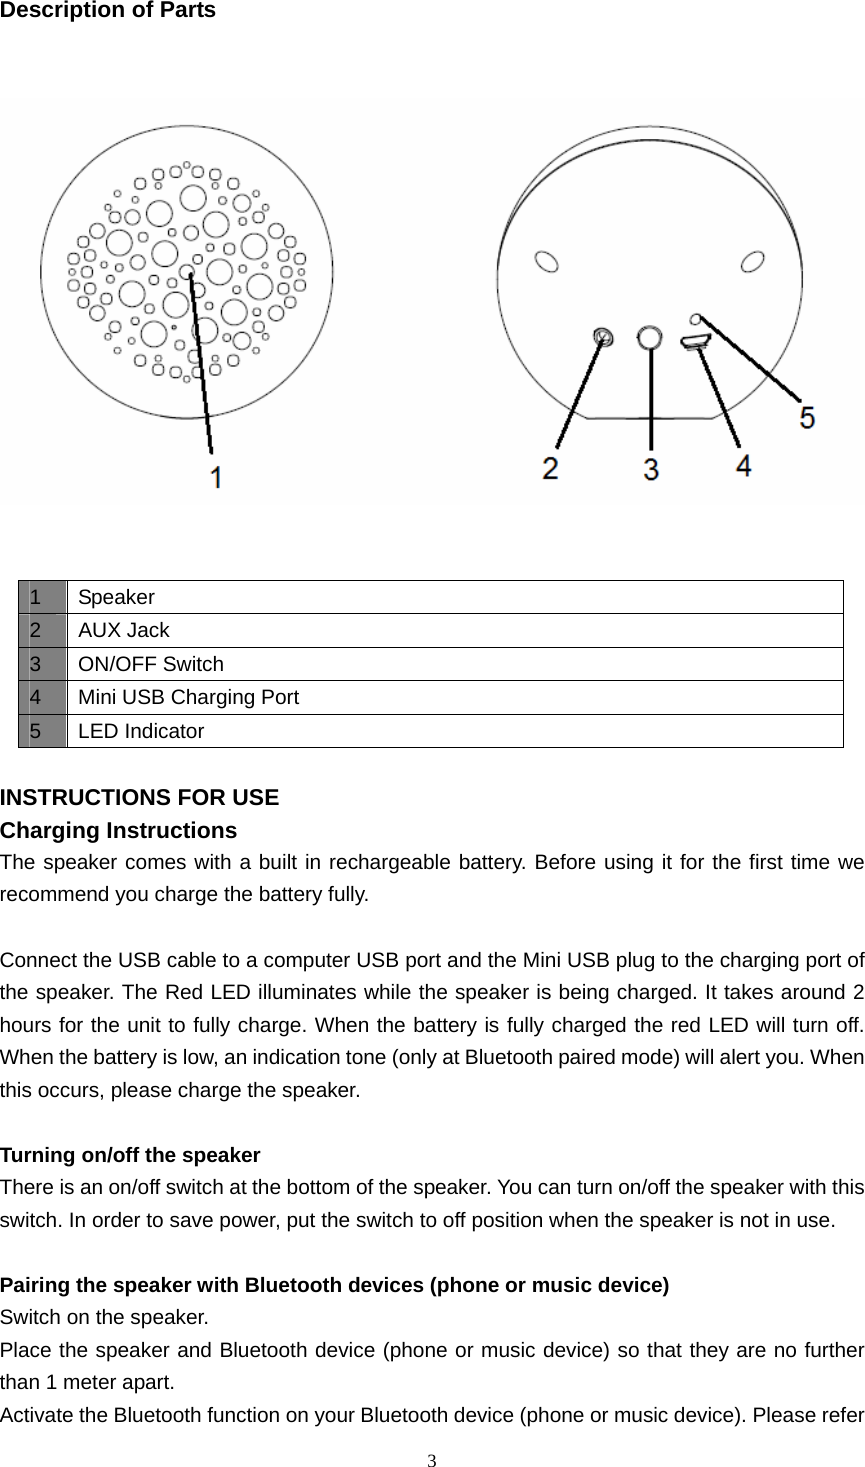  3  Description of Parts       INSTRUCTIONS FOR USE Charging Instructions The speaker comes with a built in rechargeable battery. Before using it for the first time we recommend you charge the battery fully.    Connect the USB cable to a computer USB port and the Mini USB plug to the charging port of the speaker. The Red LED illuminates while the speaker is being charged. It takes around 2 hours for the unit to fully charge. When the battery is fully charged the red LED will turn off. When the battery is low, an indication tone (only at Bluetooth paired mode) will alert you. When this occurs, please charge the speaker.  Turning on/off the speaker There is an on/off switch at the bottom of the speaker. You can turn on/off the speaker with this switch. In order to save power, put the switch to off position when the speaker is not in use.  Pairing the speaker with Bluetooth devices (phone or music device) Switch on the speaker. Place the speaker and Bluetooth device (phone or music device) so that they are no further than 1 meter apart. Activate the Bluetooth function on your Bluetooth device (phone or music device). Please refer 1 Speaker 2 AUX Jack 3 ON/OFF Switch 4  Mini USB Charging Port 5 LED Indicator 